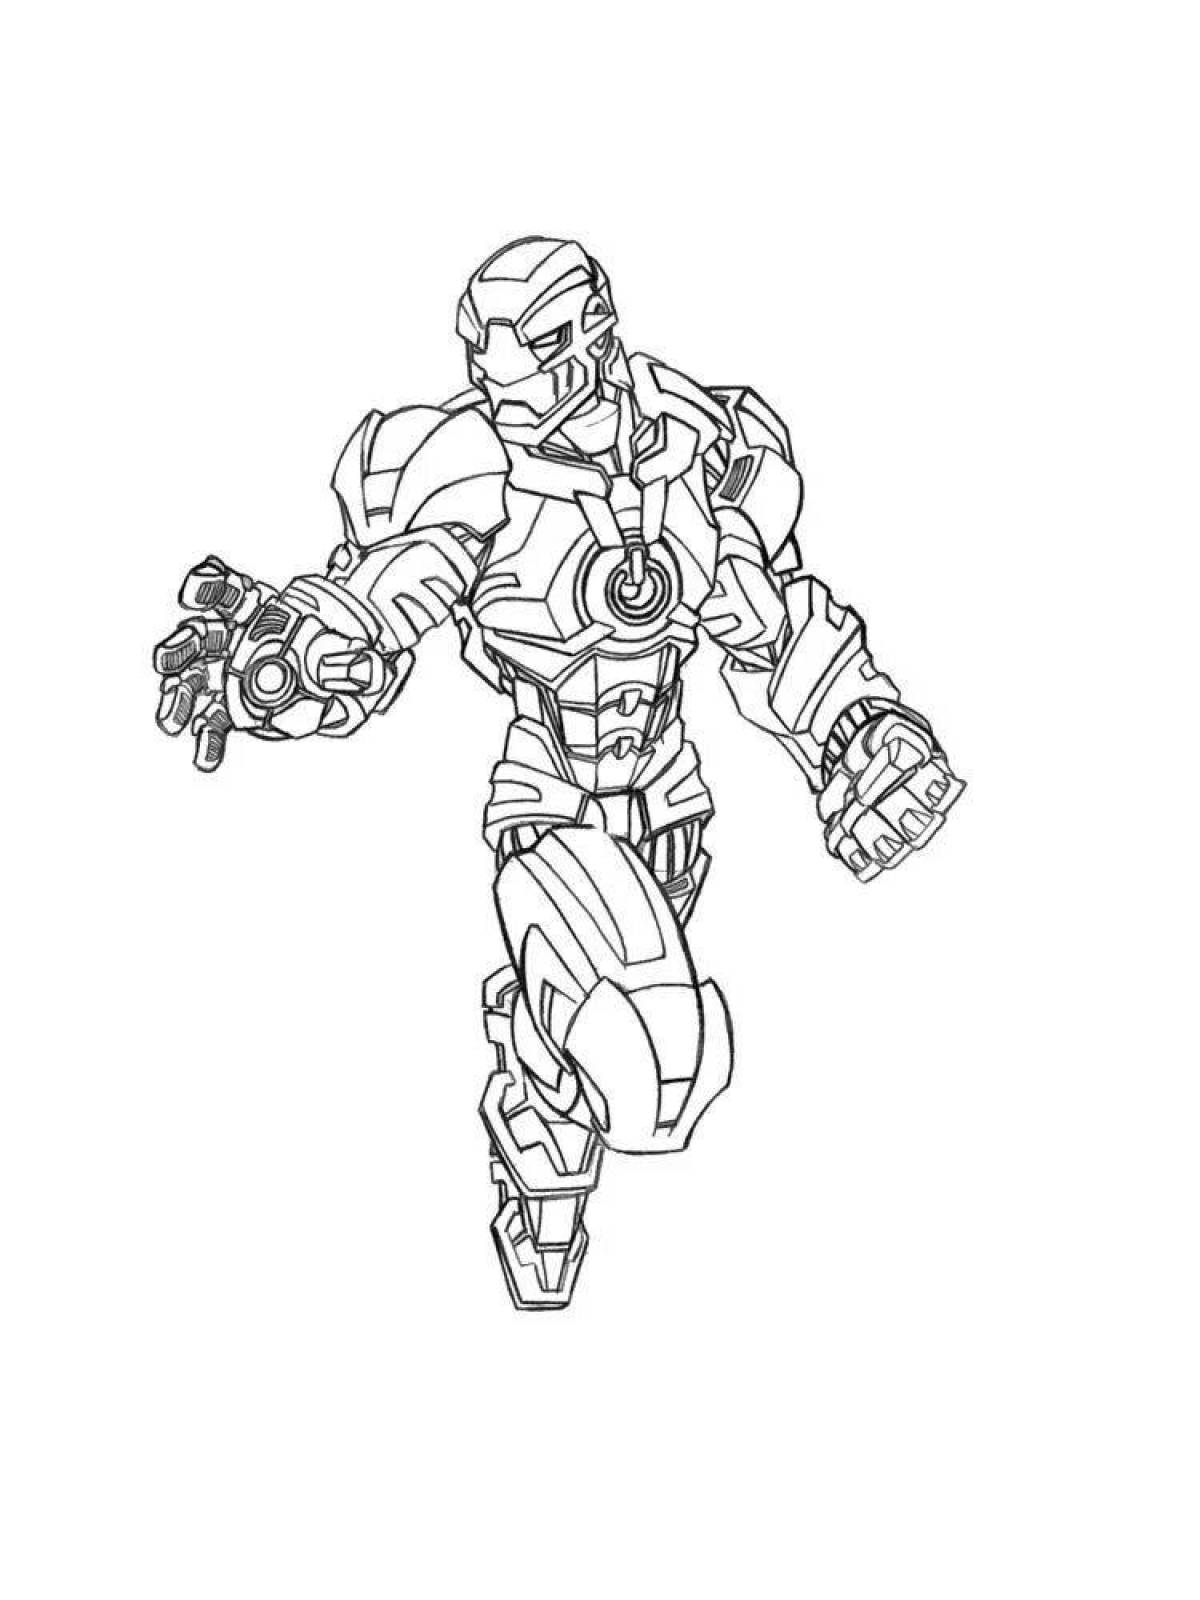 Brightly colored iron patriot coloring book